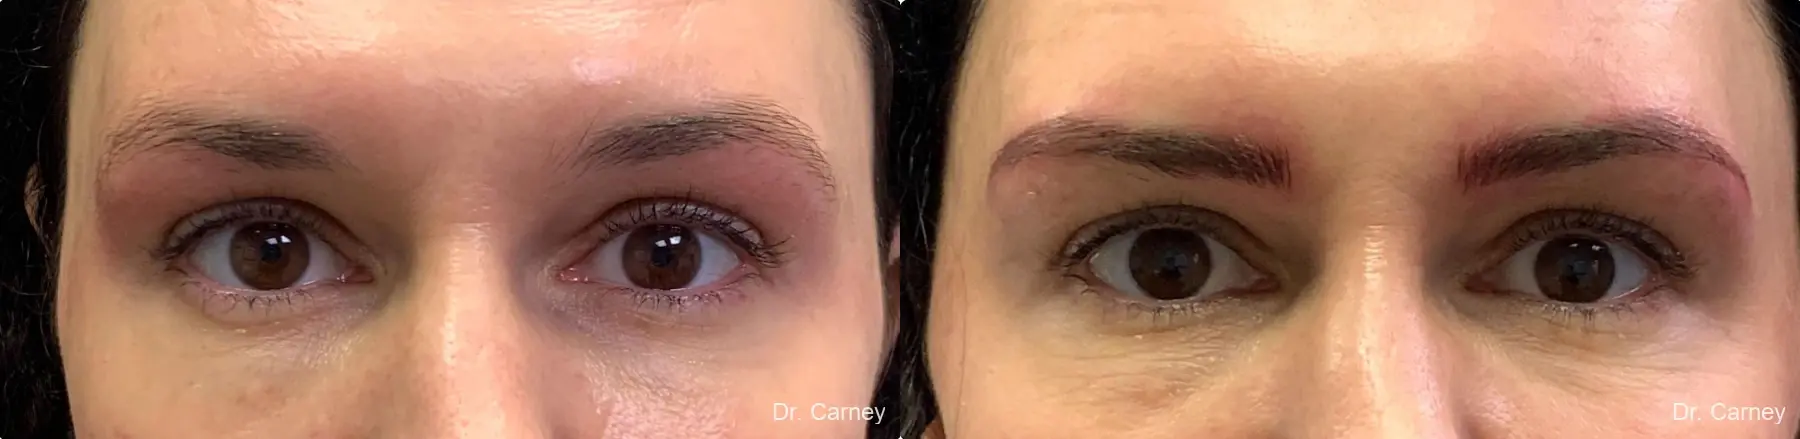 Microblading: Patient 1 - Before and After 1